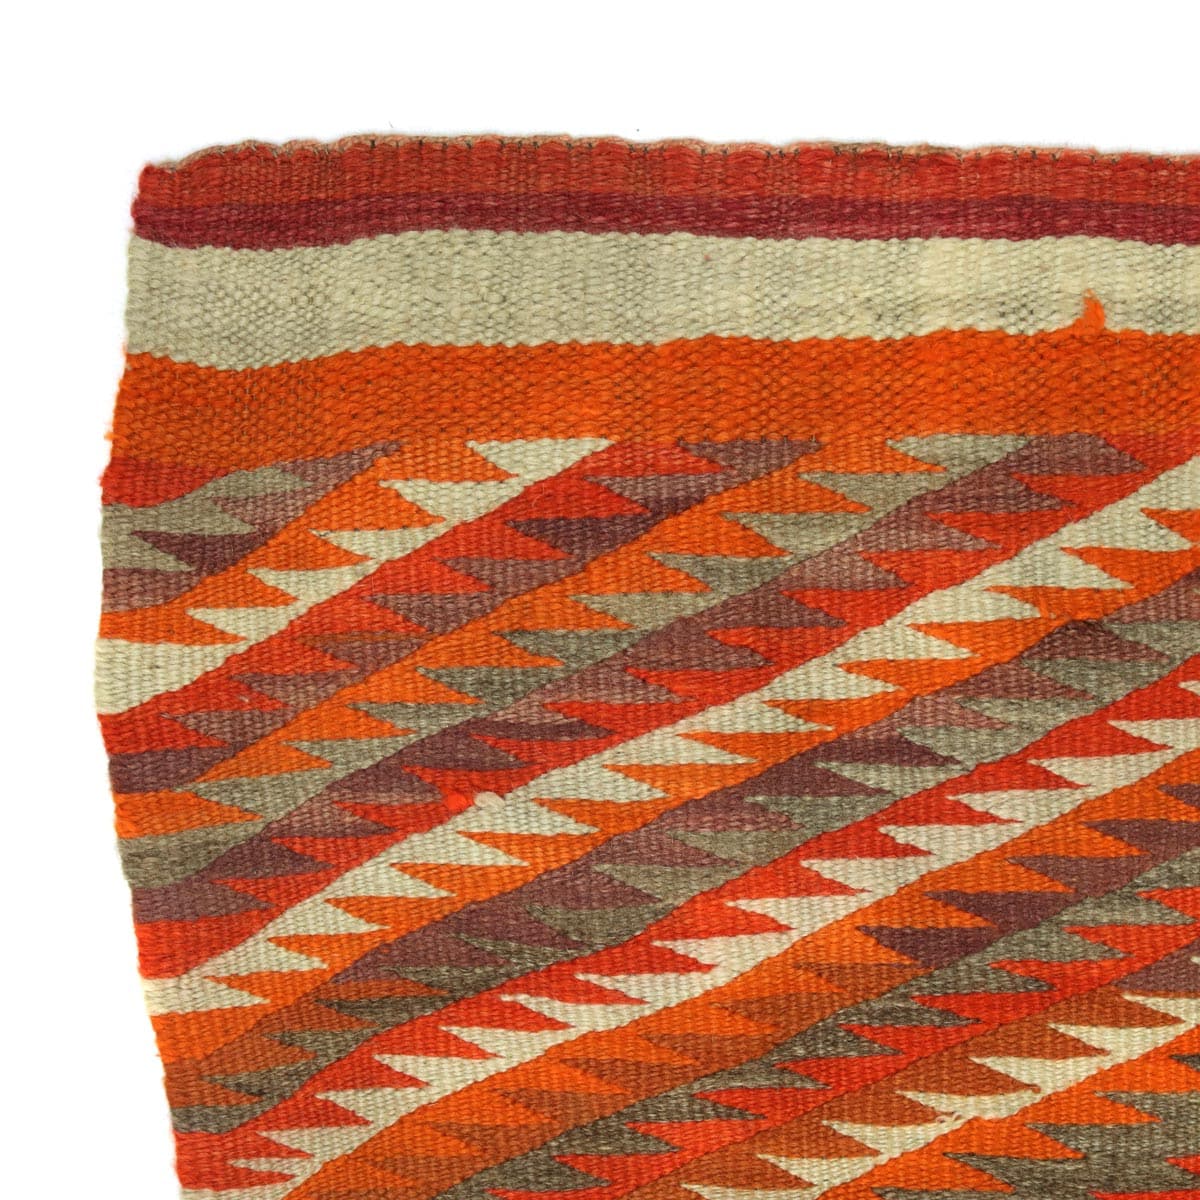 Navajo Transitional Eyedazzler Blanket c. 1890s, 88.75" x 63.75" (T90404A-1221-006) 3
